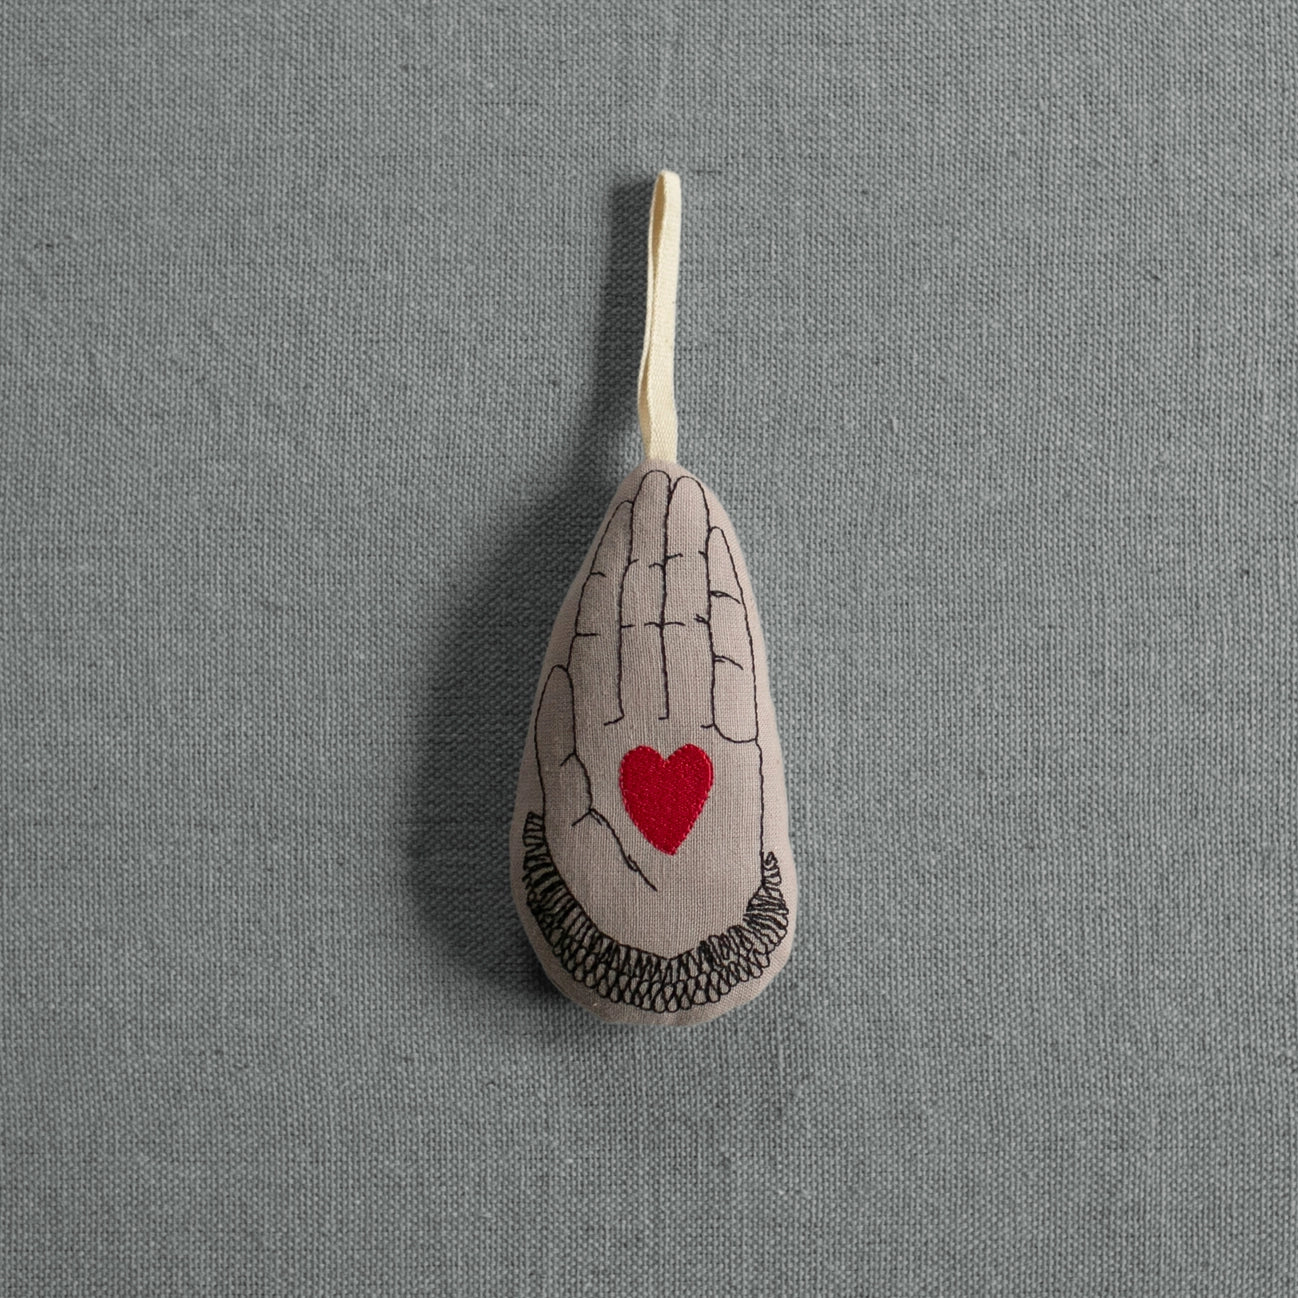 Heart in Hand Lavender Ornament